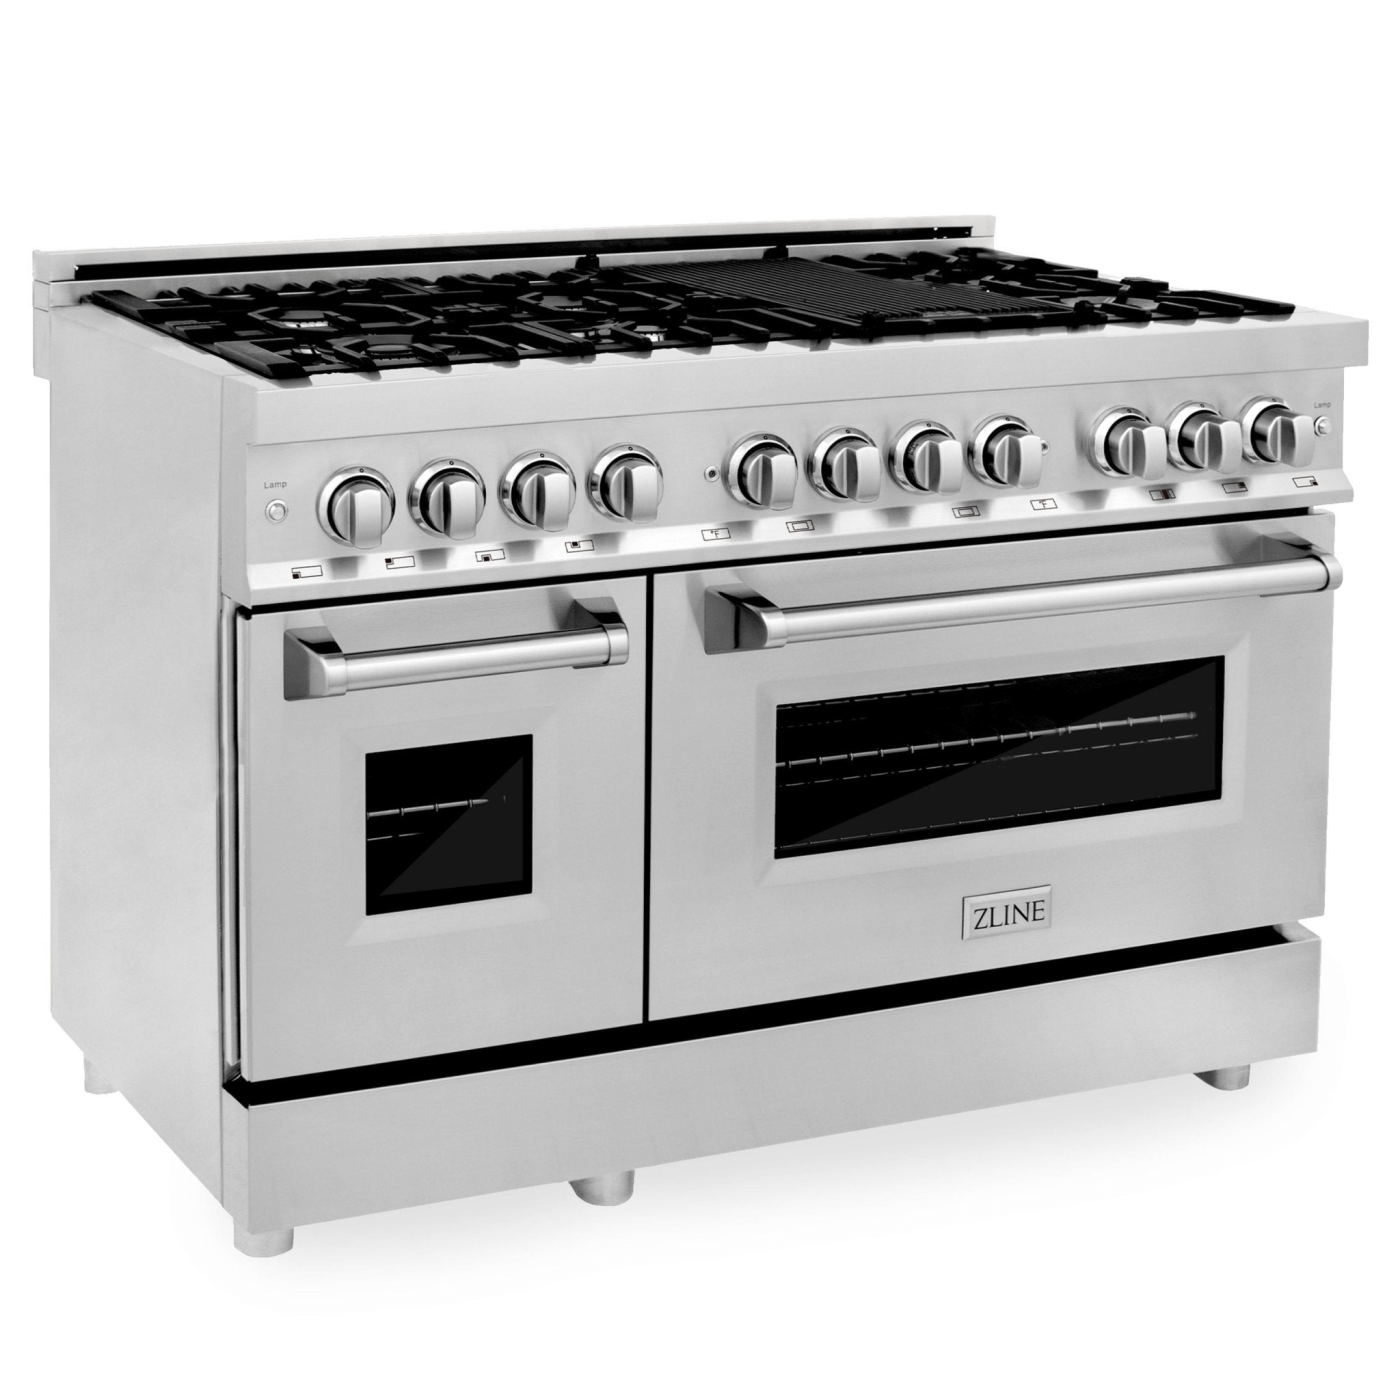 ZLINE 48 in. Professional Dual Fuel Range in Stainless Steel (RA48) - white background